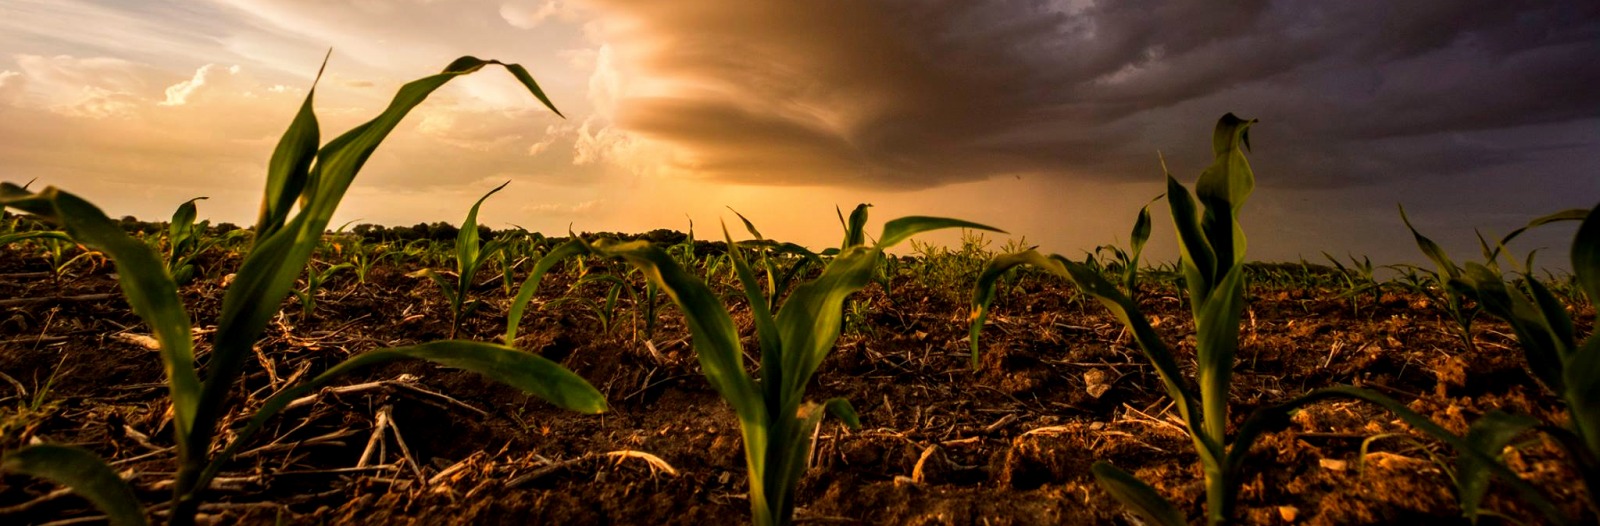 Corn plants sprout with large dark storm clouds overhead